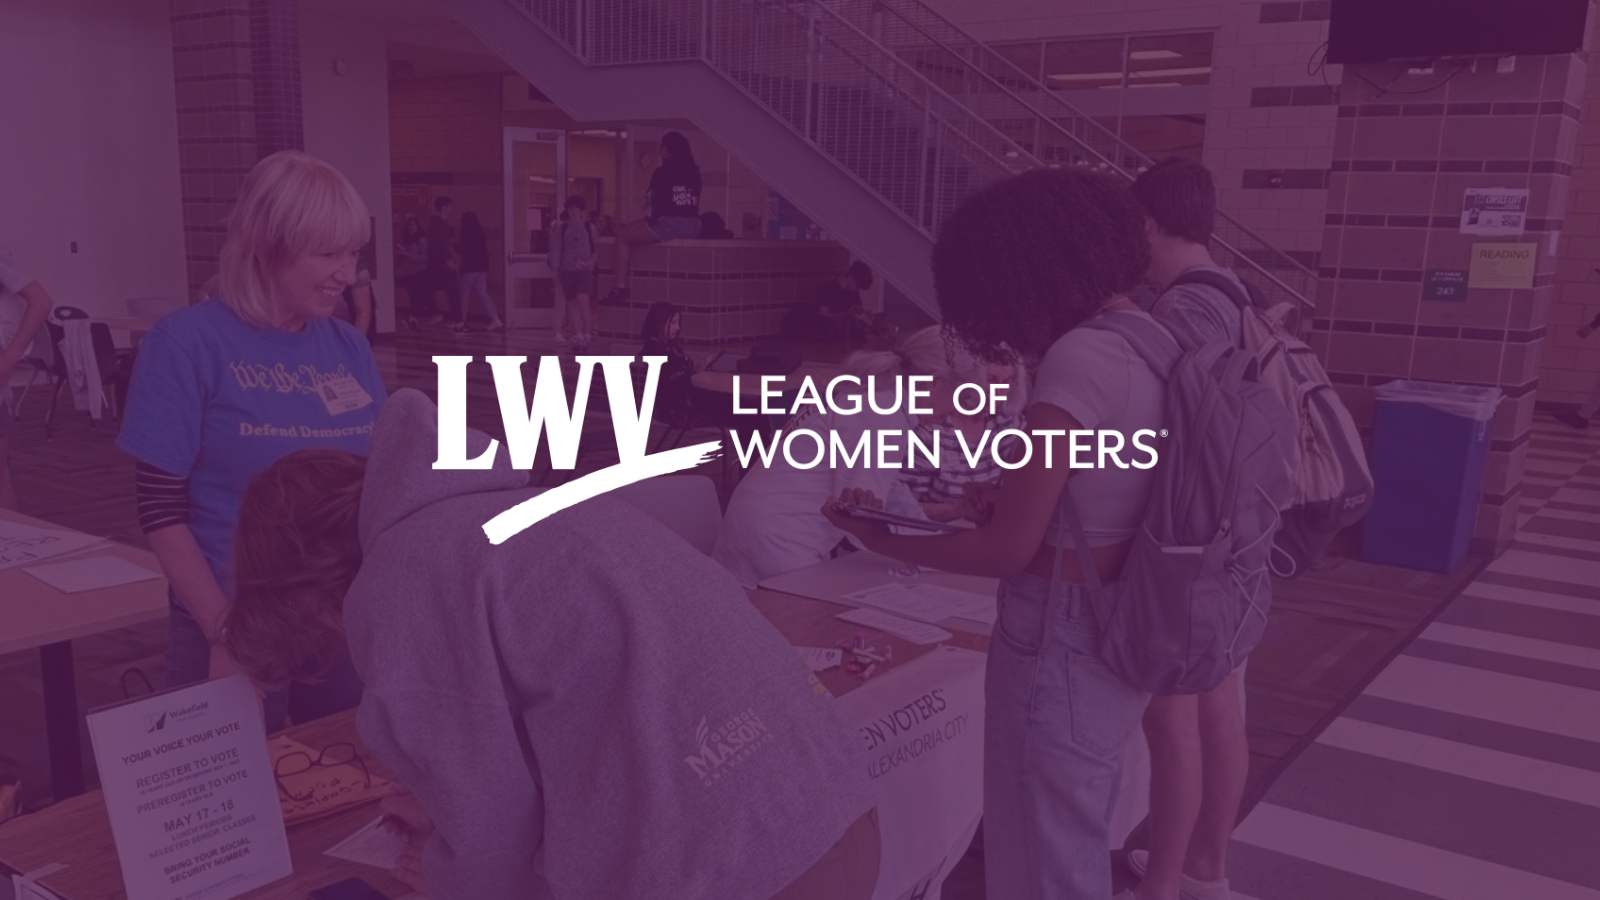 LWV members registering Virginia High Schoolers to vote. The image has a purple overlay and the LWV logo is centered.